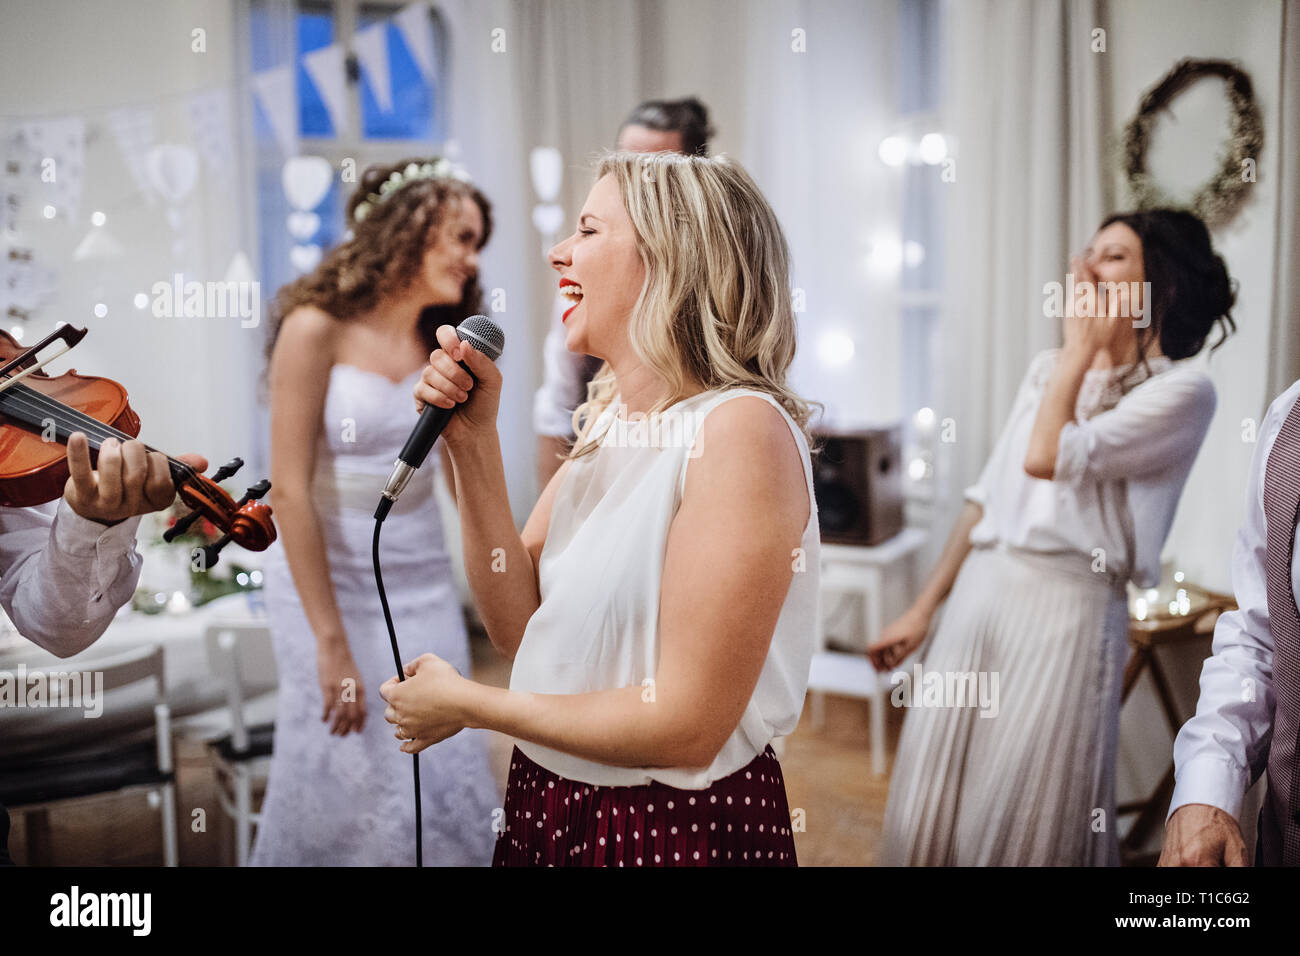 A young woman singing on a wedding reception, bride and guests dancing. Stock Photo